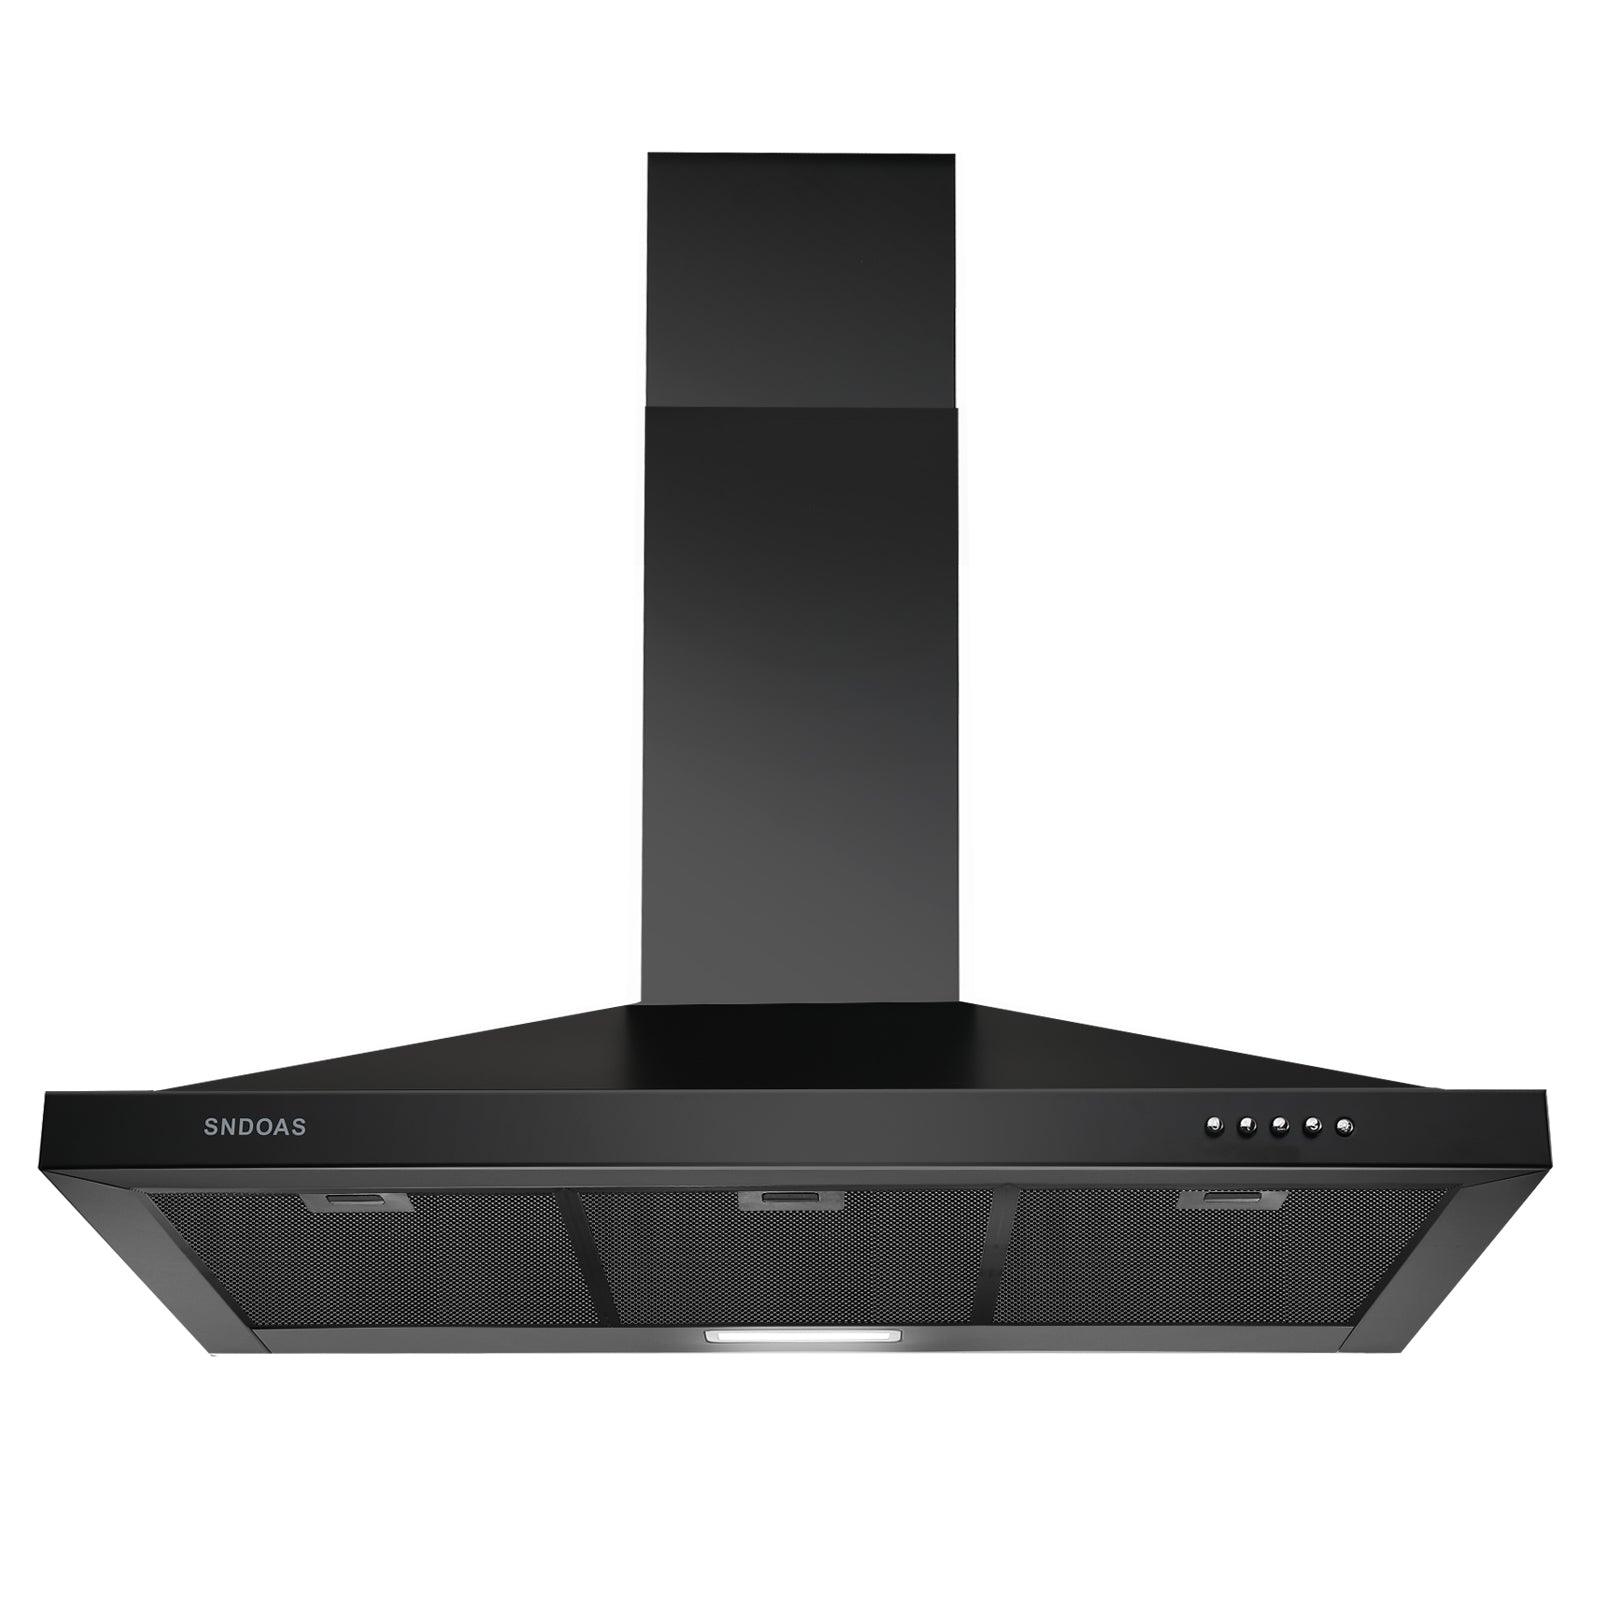 Tieasy 36 inch Wall Mount Range Hood Black 450 CFM Stove Vent with 3 Speed Fan